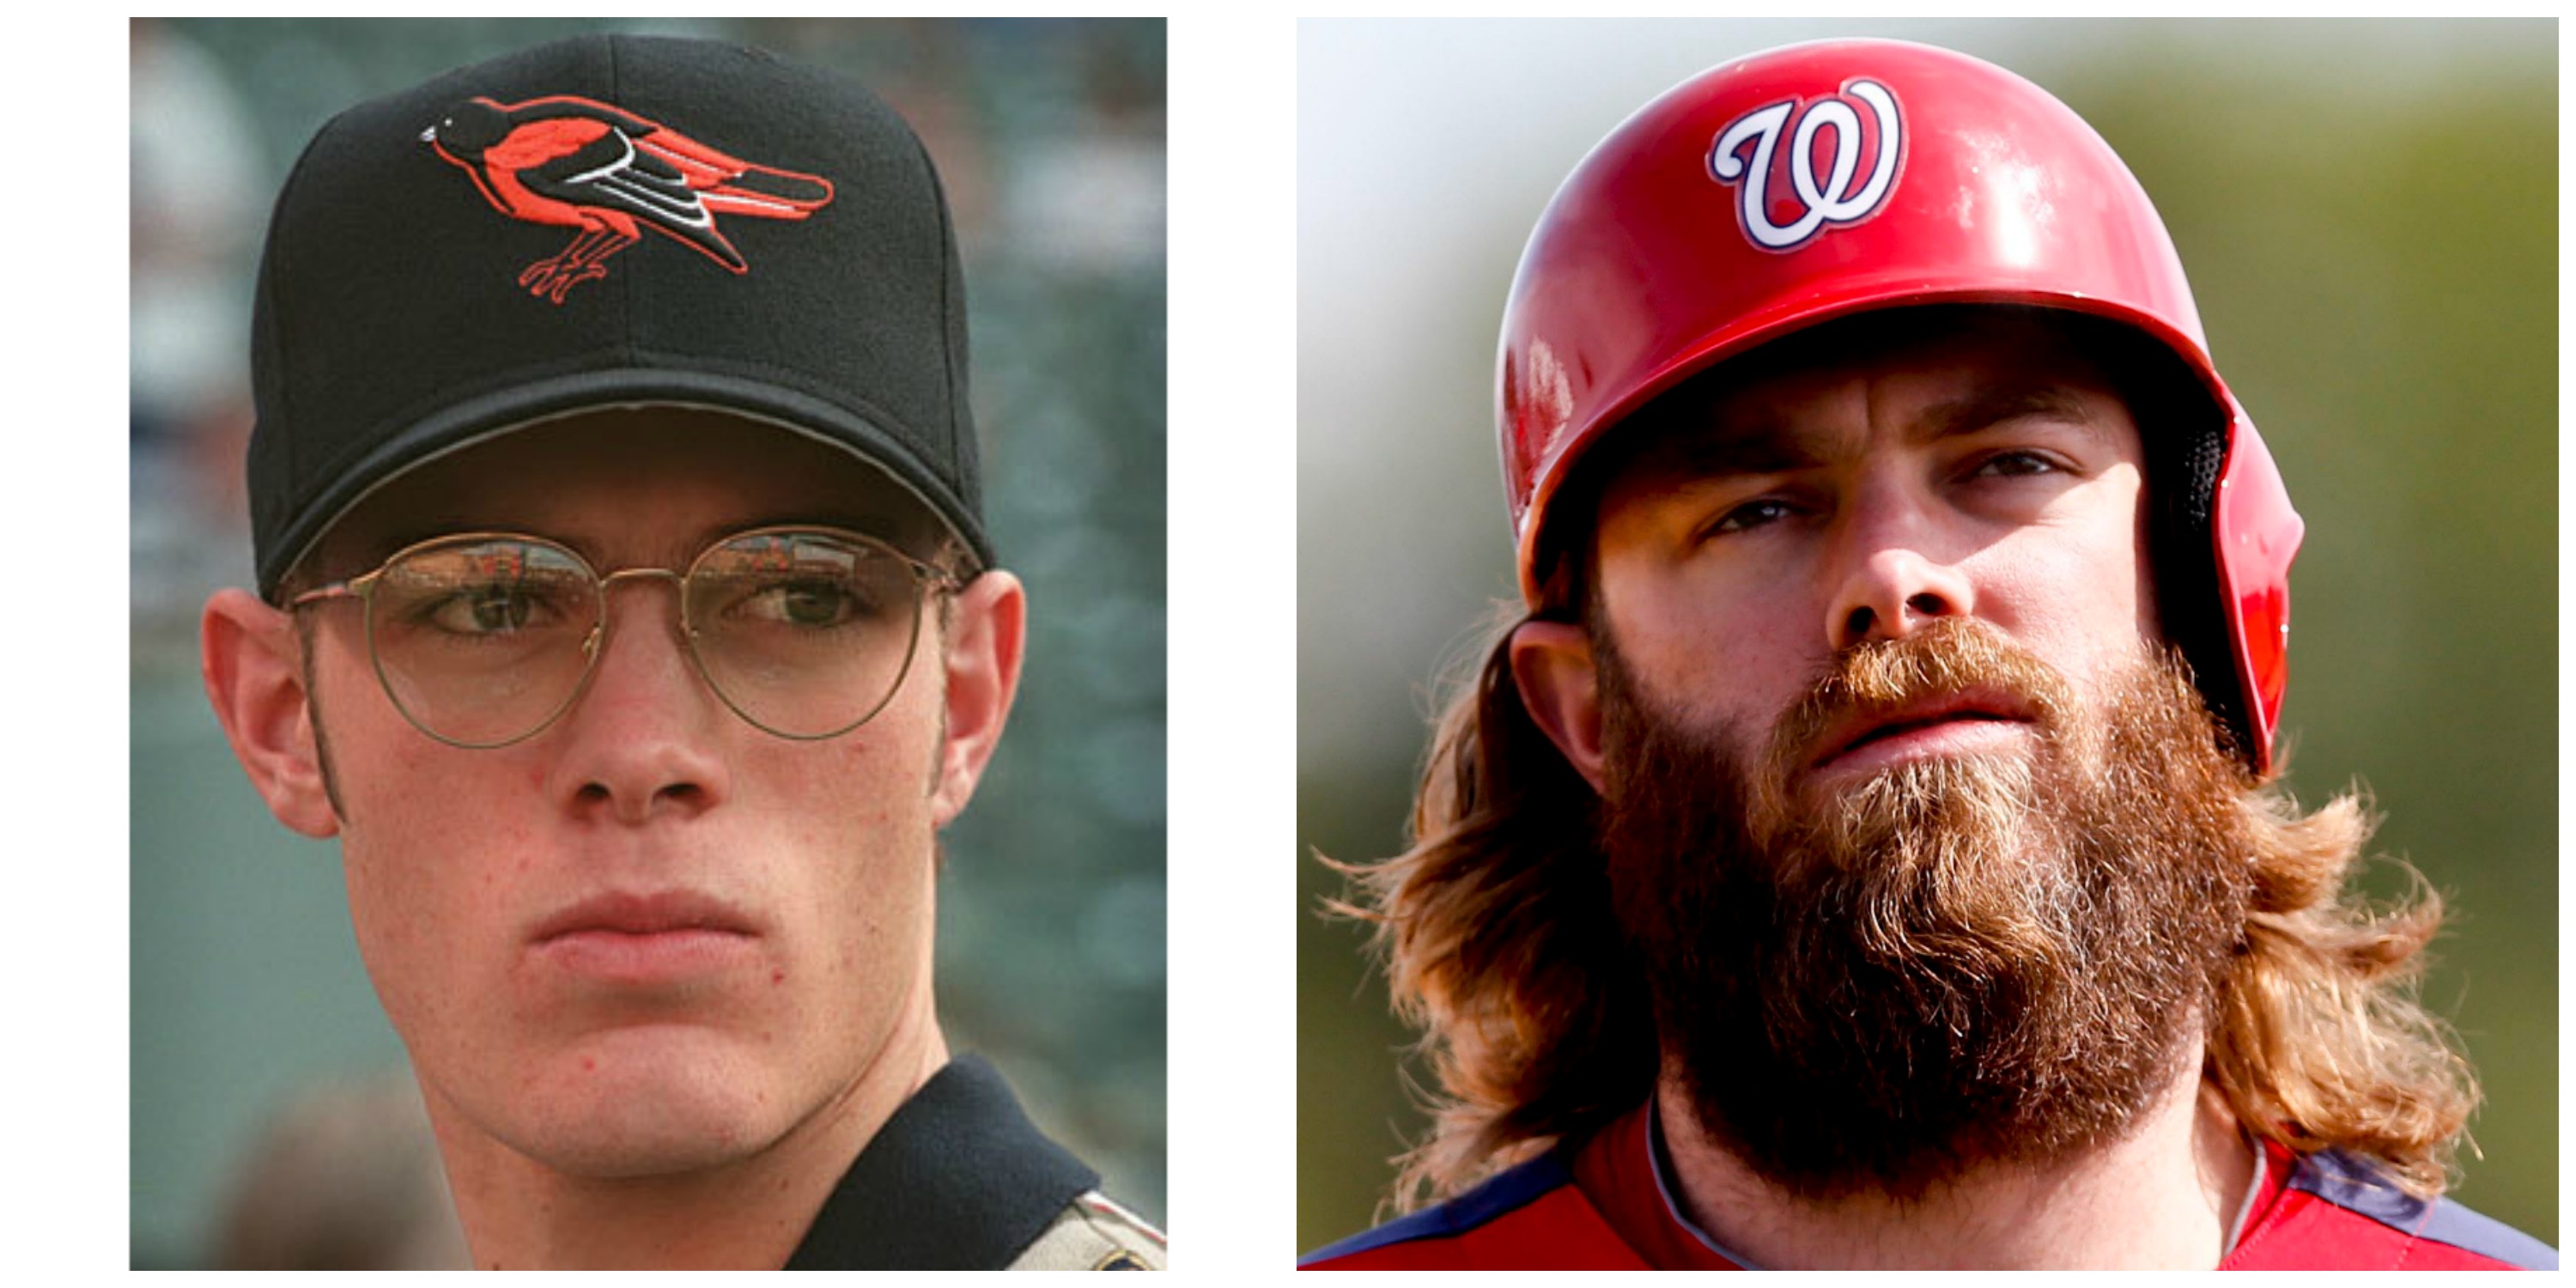 No shave notice: Beards have become fashion statement for athletes